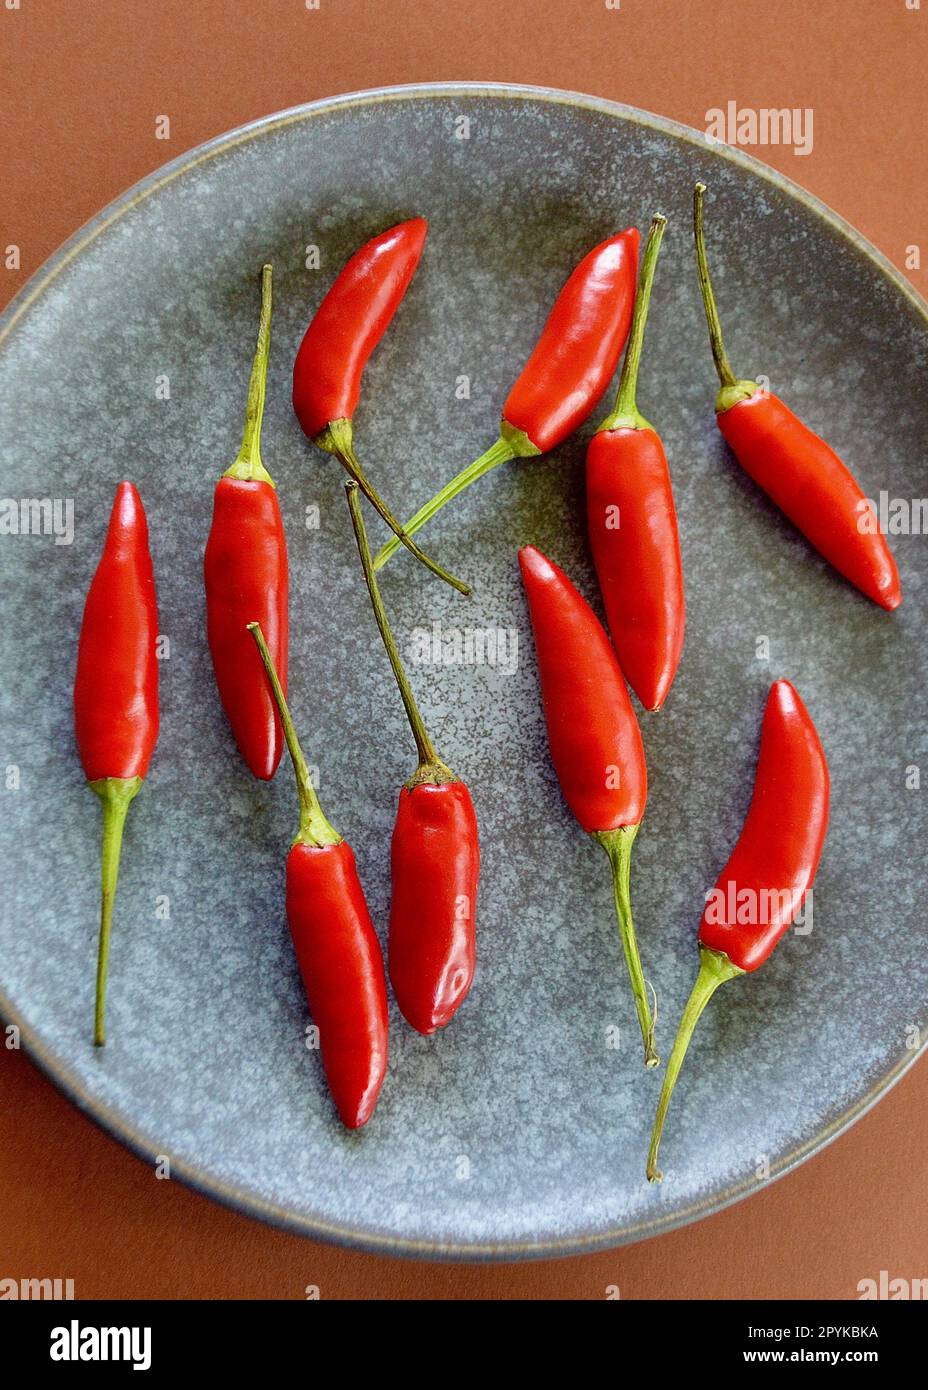 Red hot chili peppers in the kitchen Stock Photo